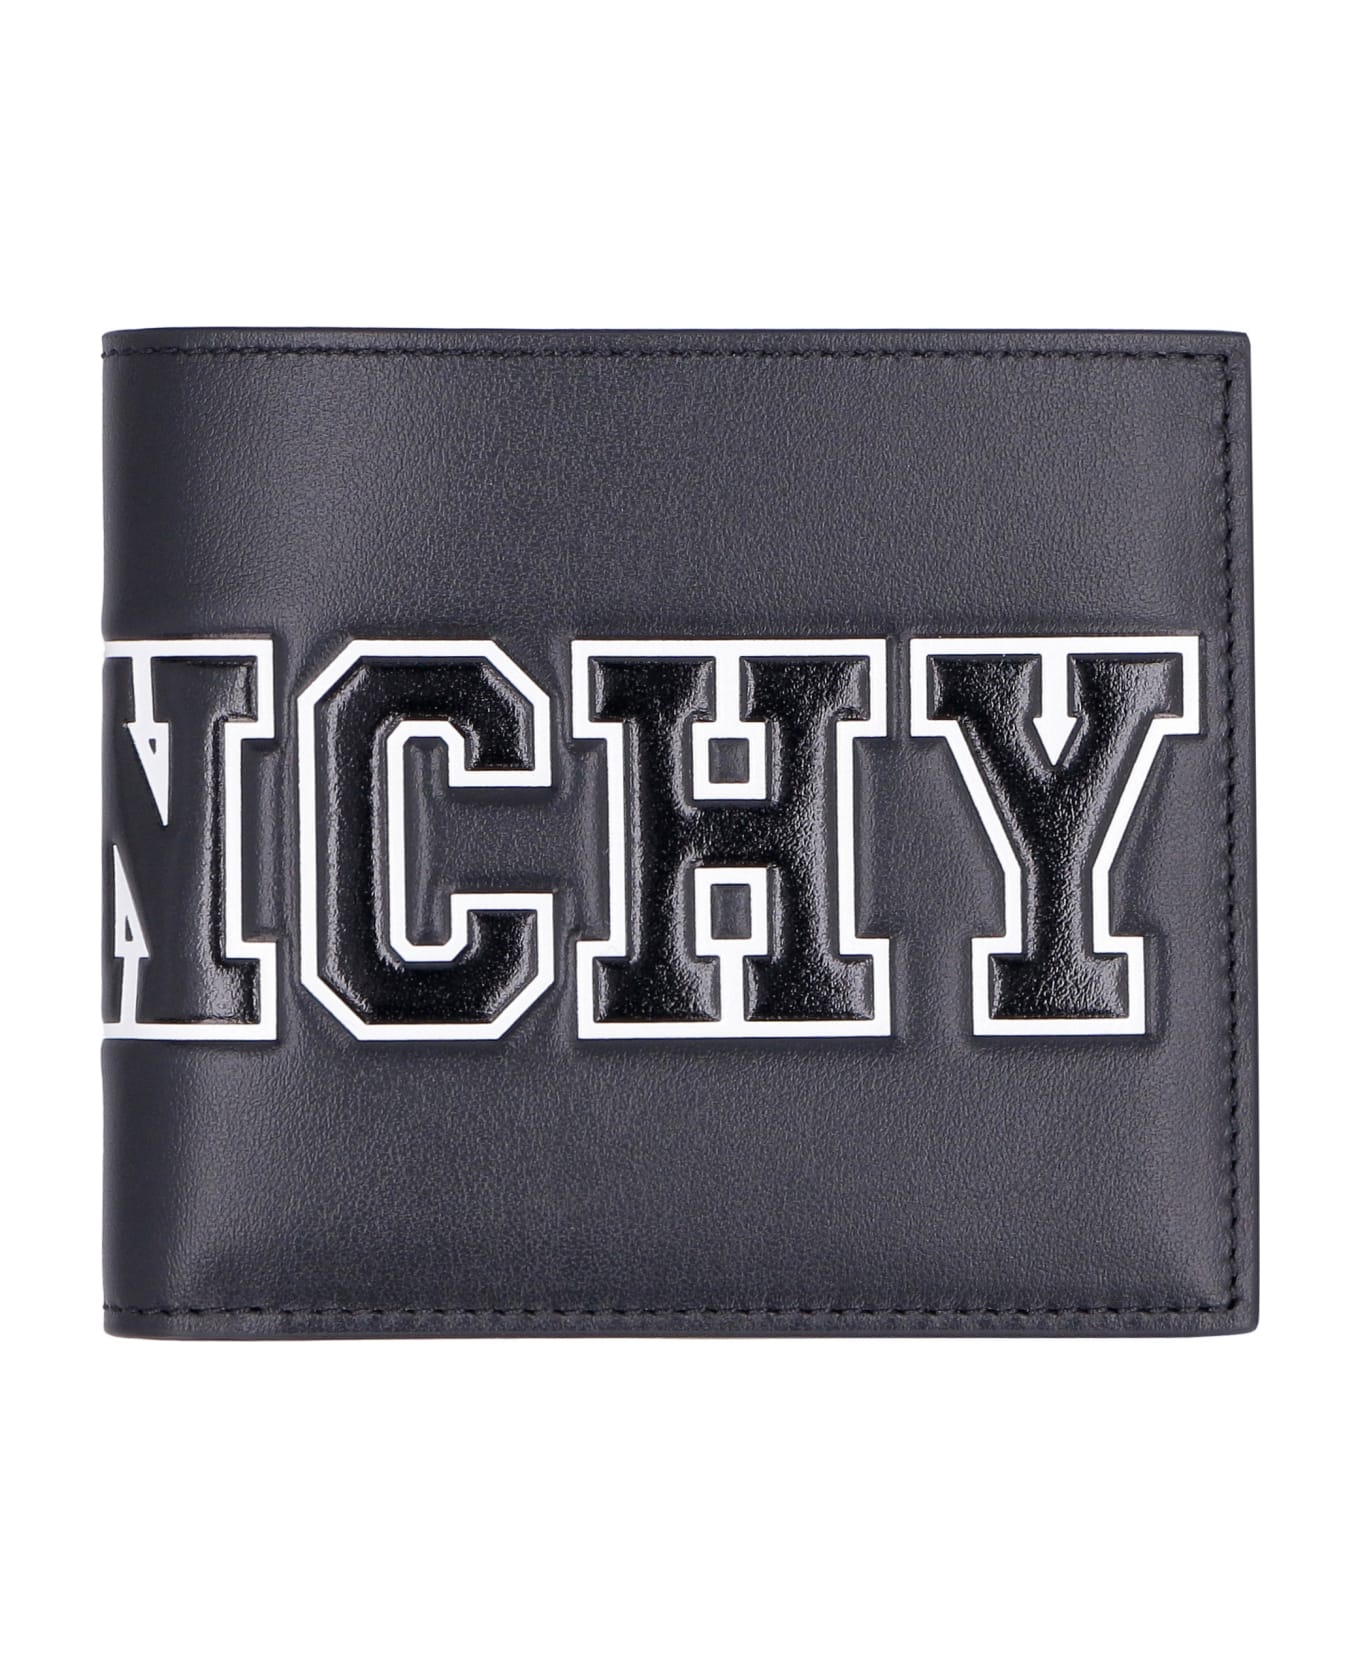 Givenchy Logo Leather Wallet - BLACK 財布